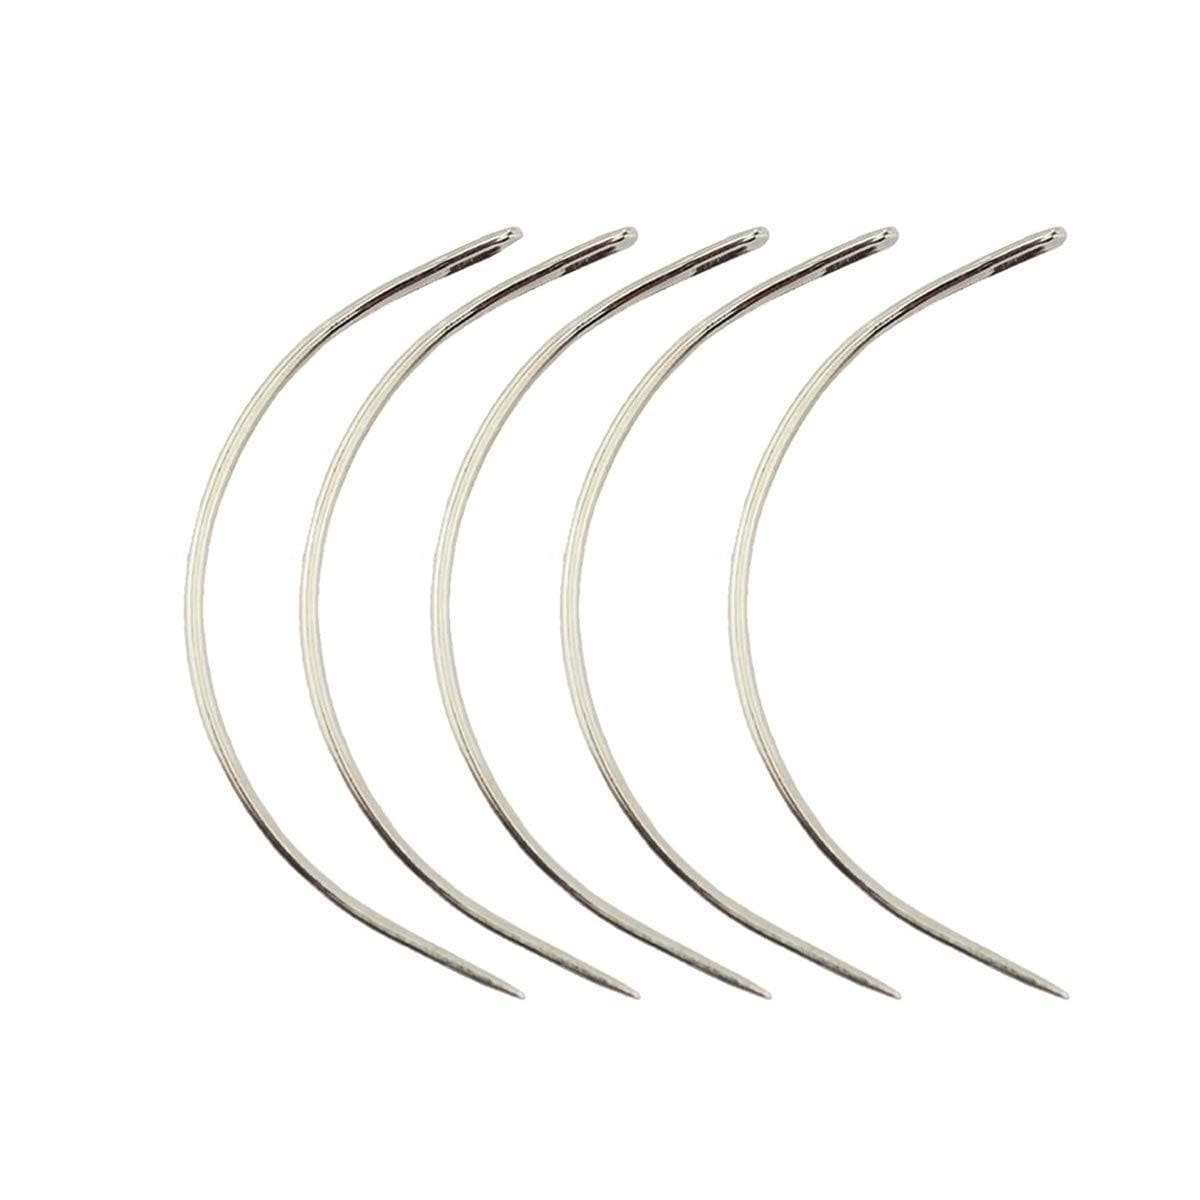 10 pieces of C Type / Curve Weaving Needle ,Weaving Curved Needles Pin ...